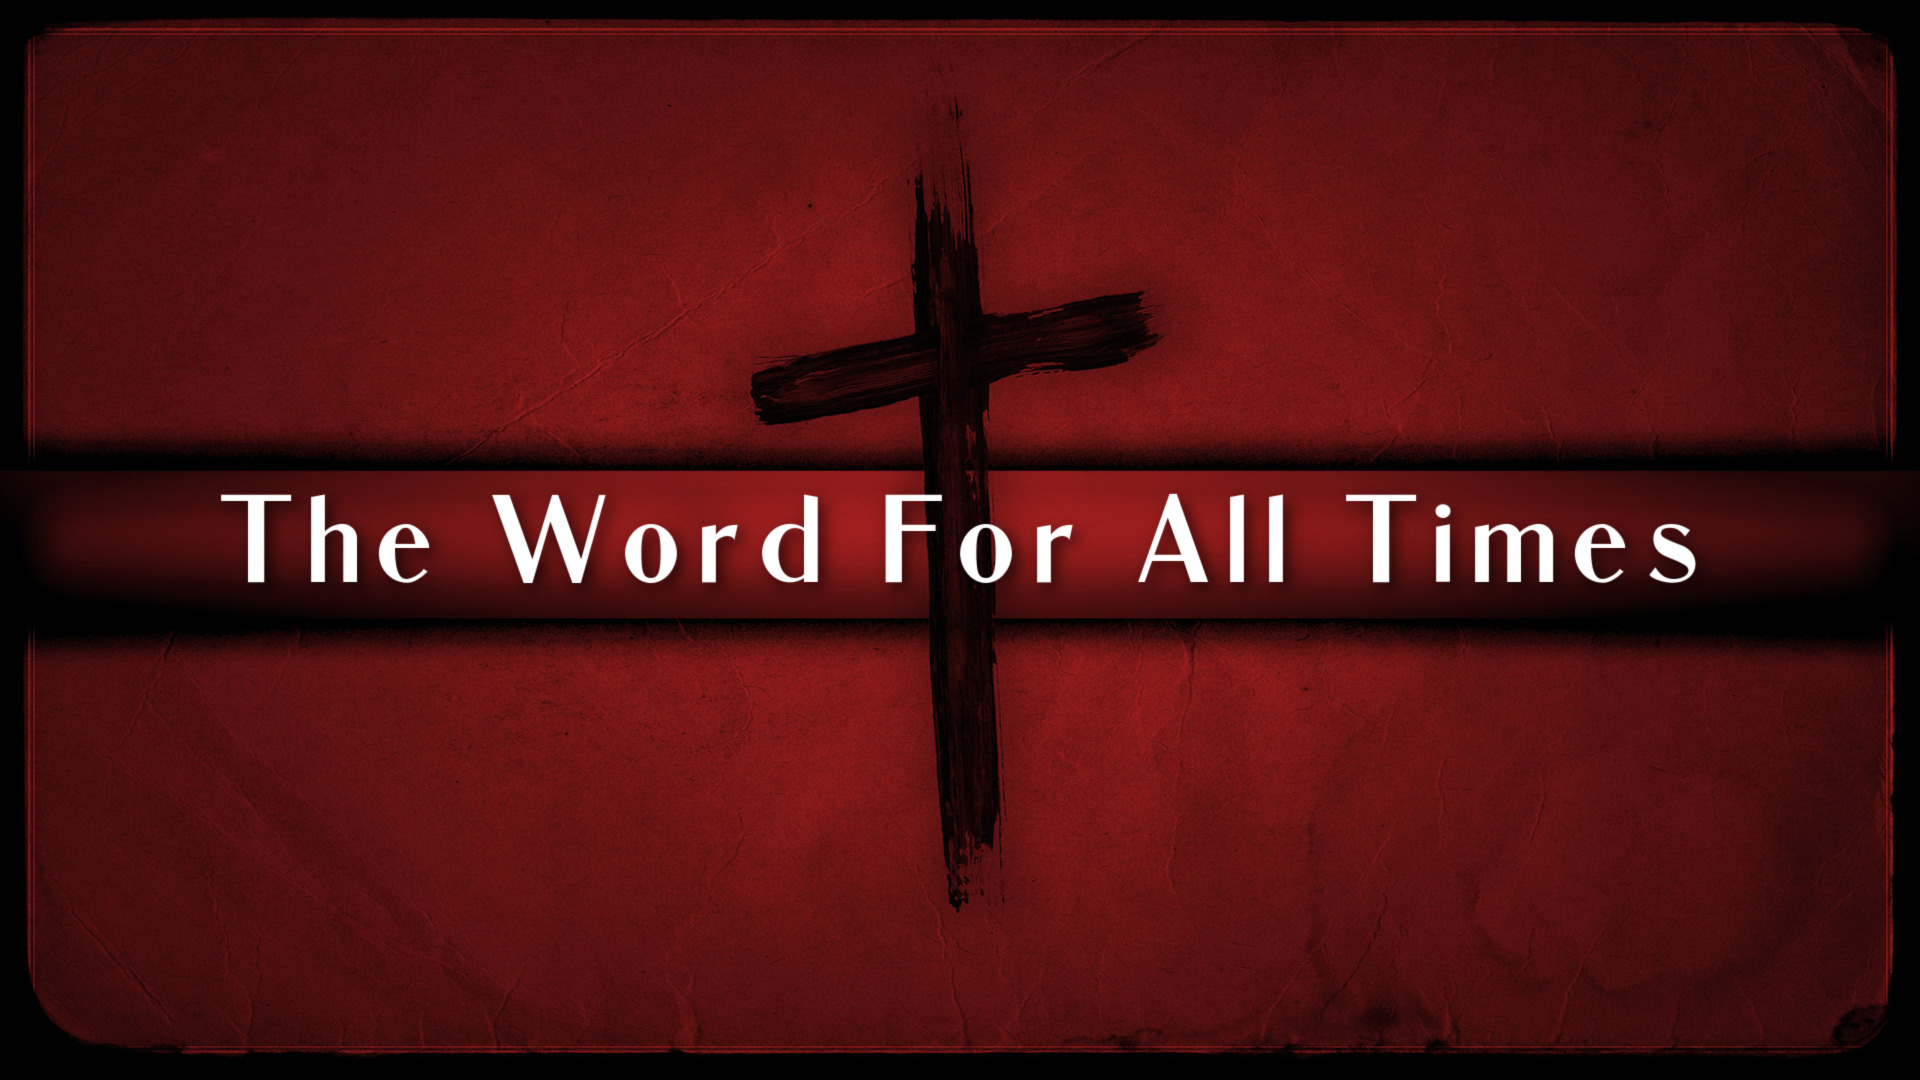 The Word For All Times